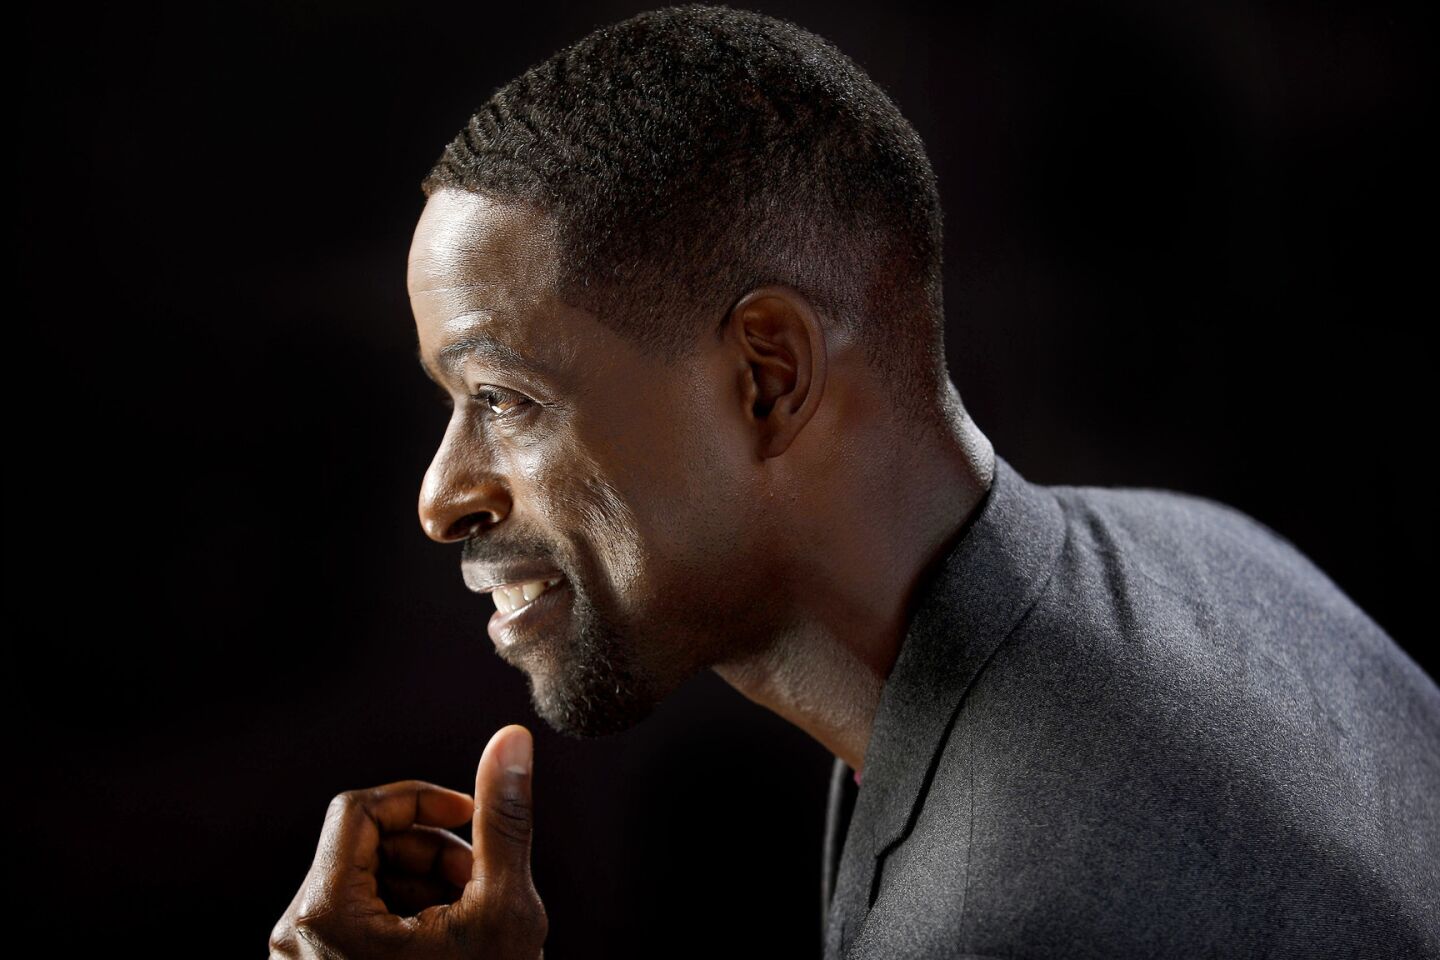 Celebrity portraits by The Times | Sterling K. Brown